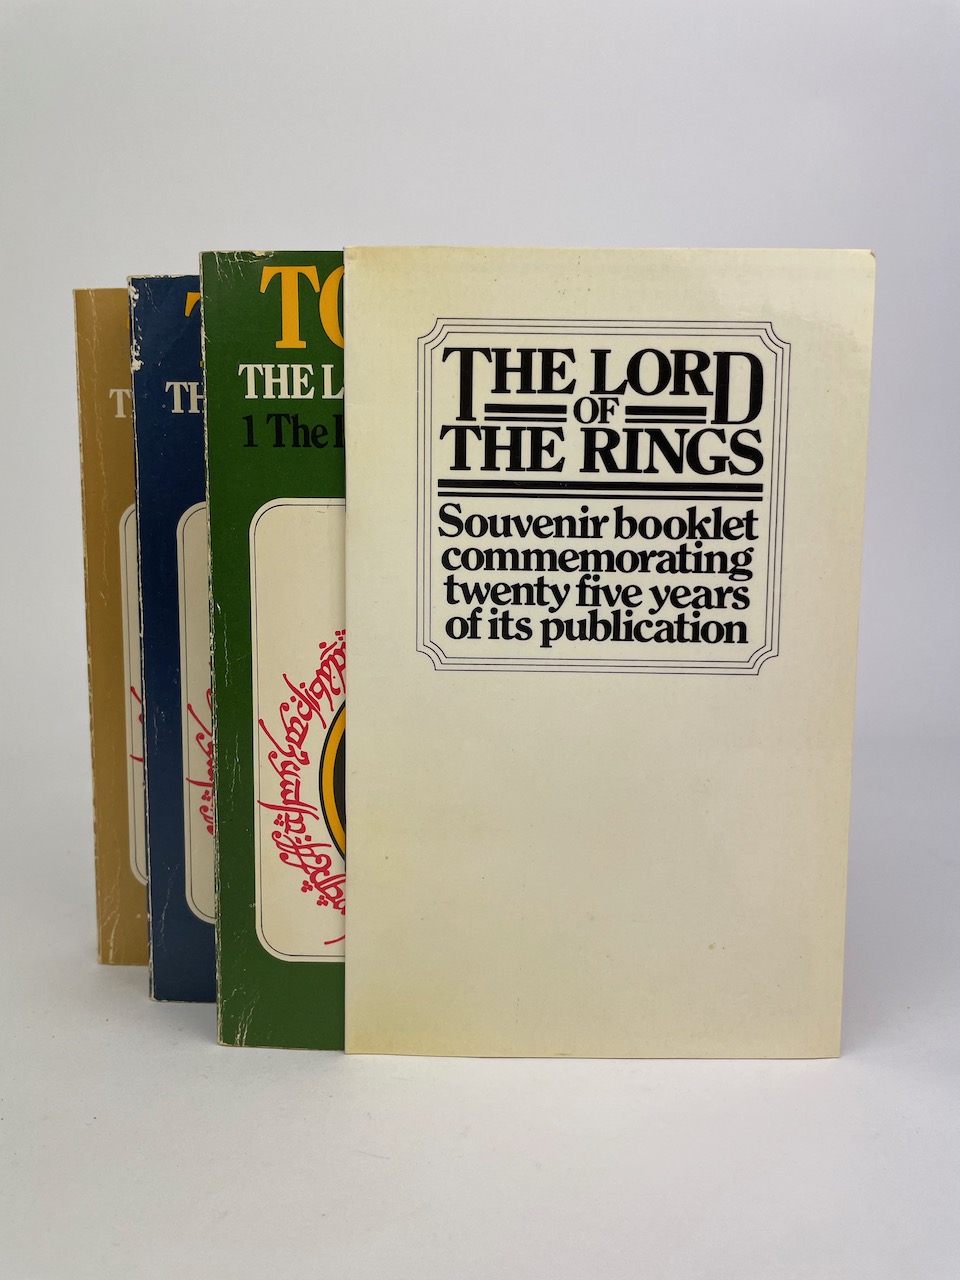 The Lord of the Rings 25th Anniversary Collection from 1980 by Unwin Paperbacks 6